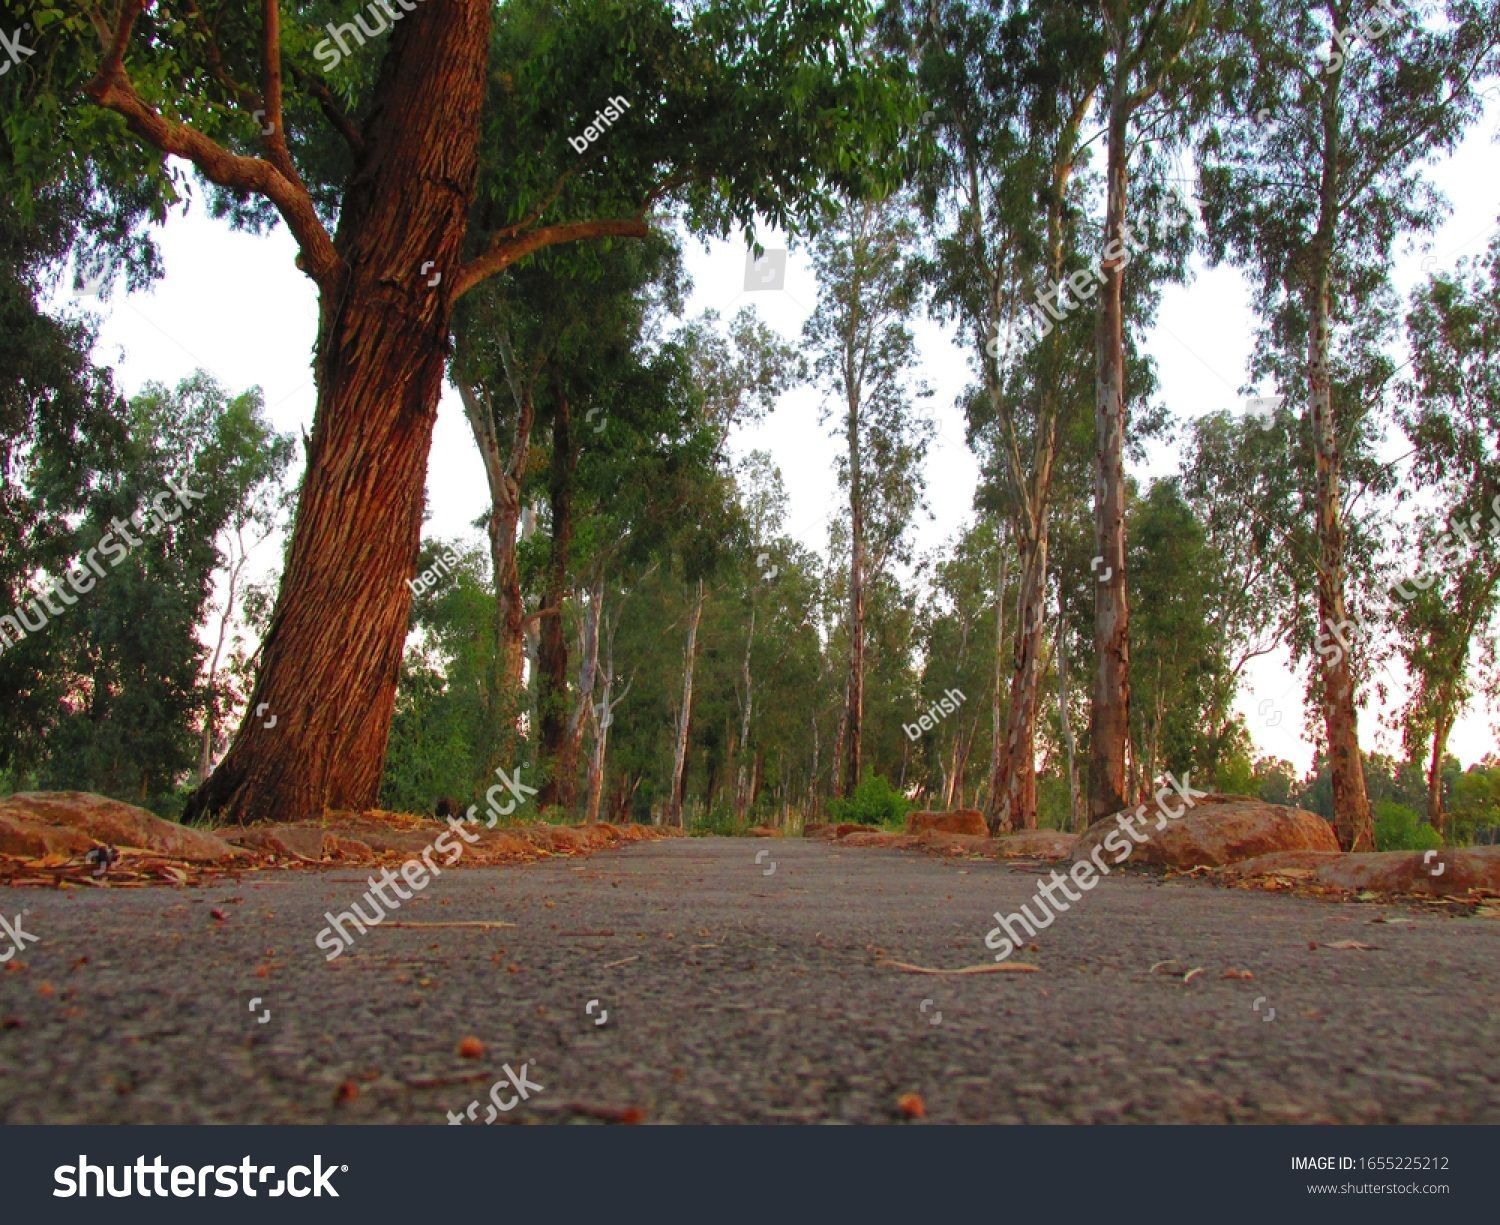 stock-photo-the-way-of-nature-among-the-trees-1655225212.jpg